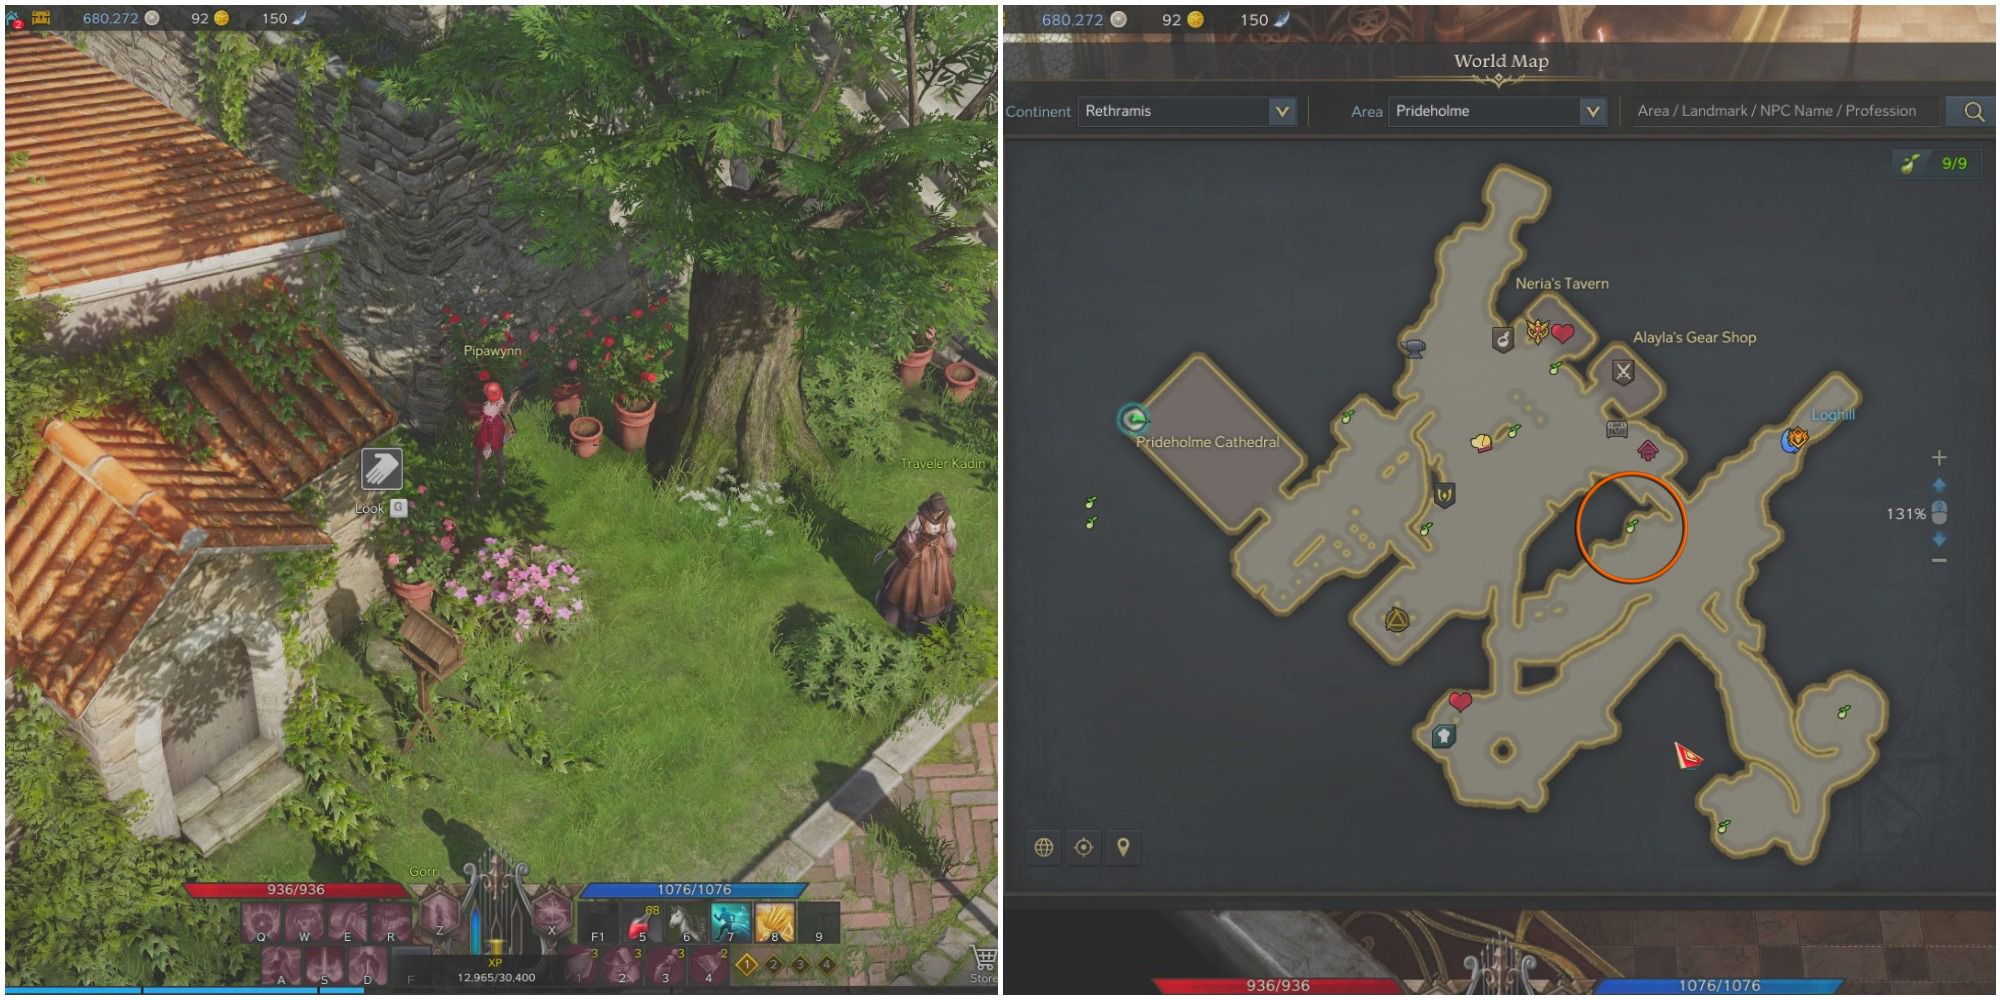 A split image of a bard standing beside a house with a garden that shows an interact icon, and a map of Prideholme